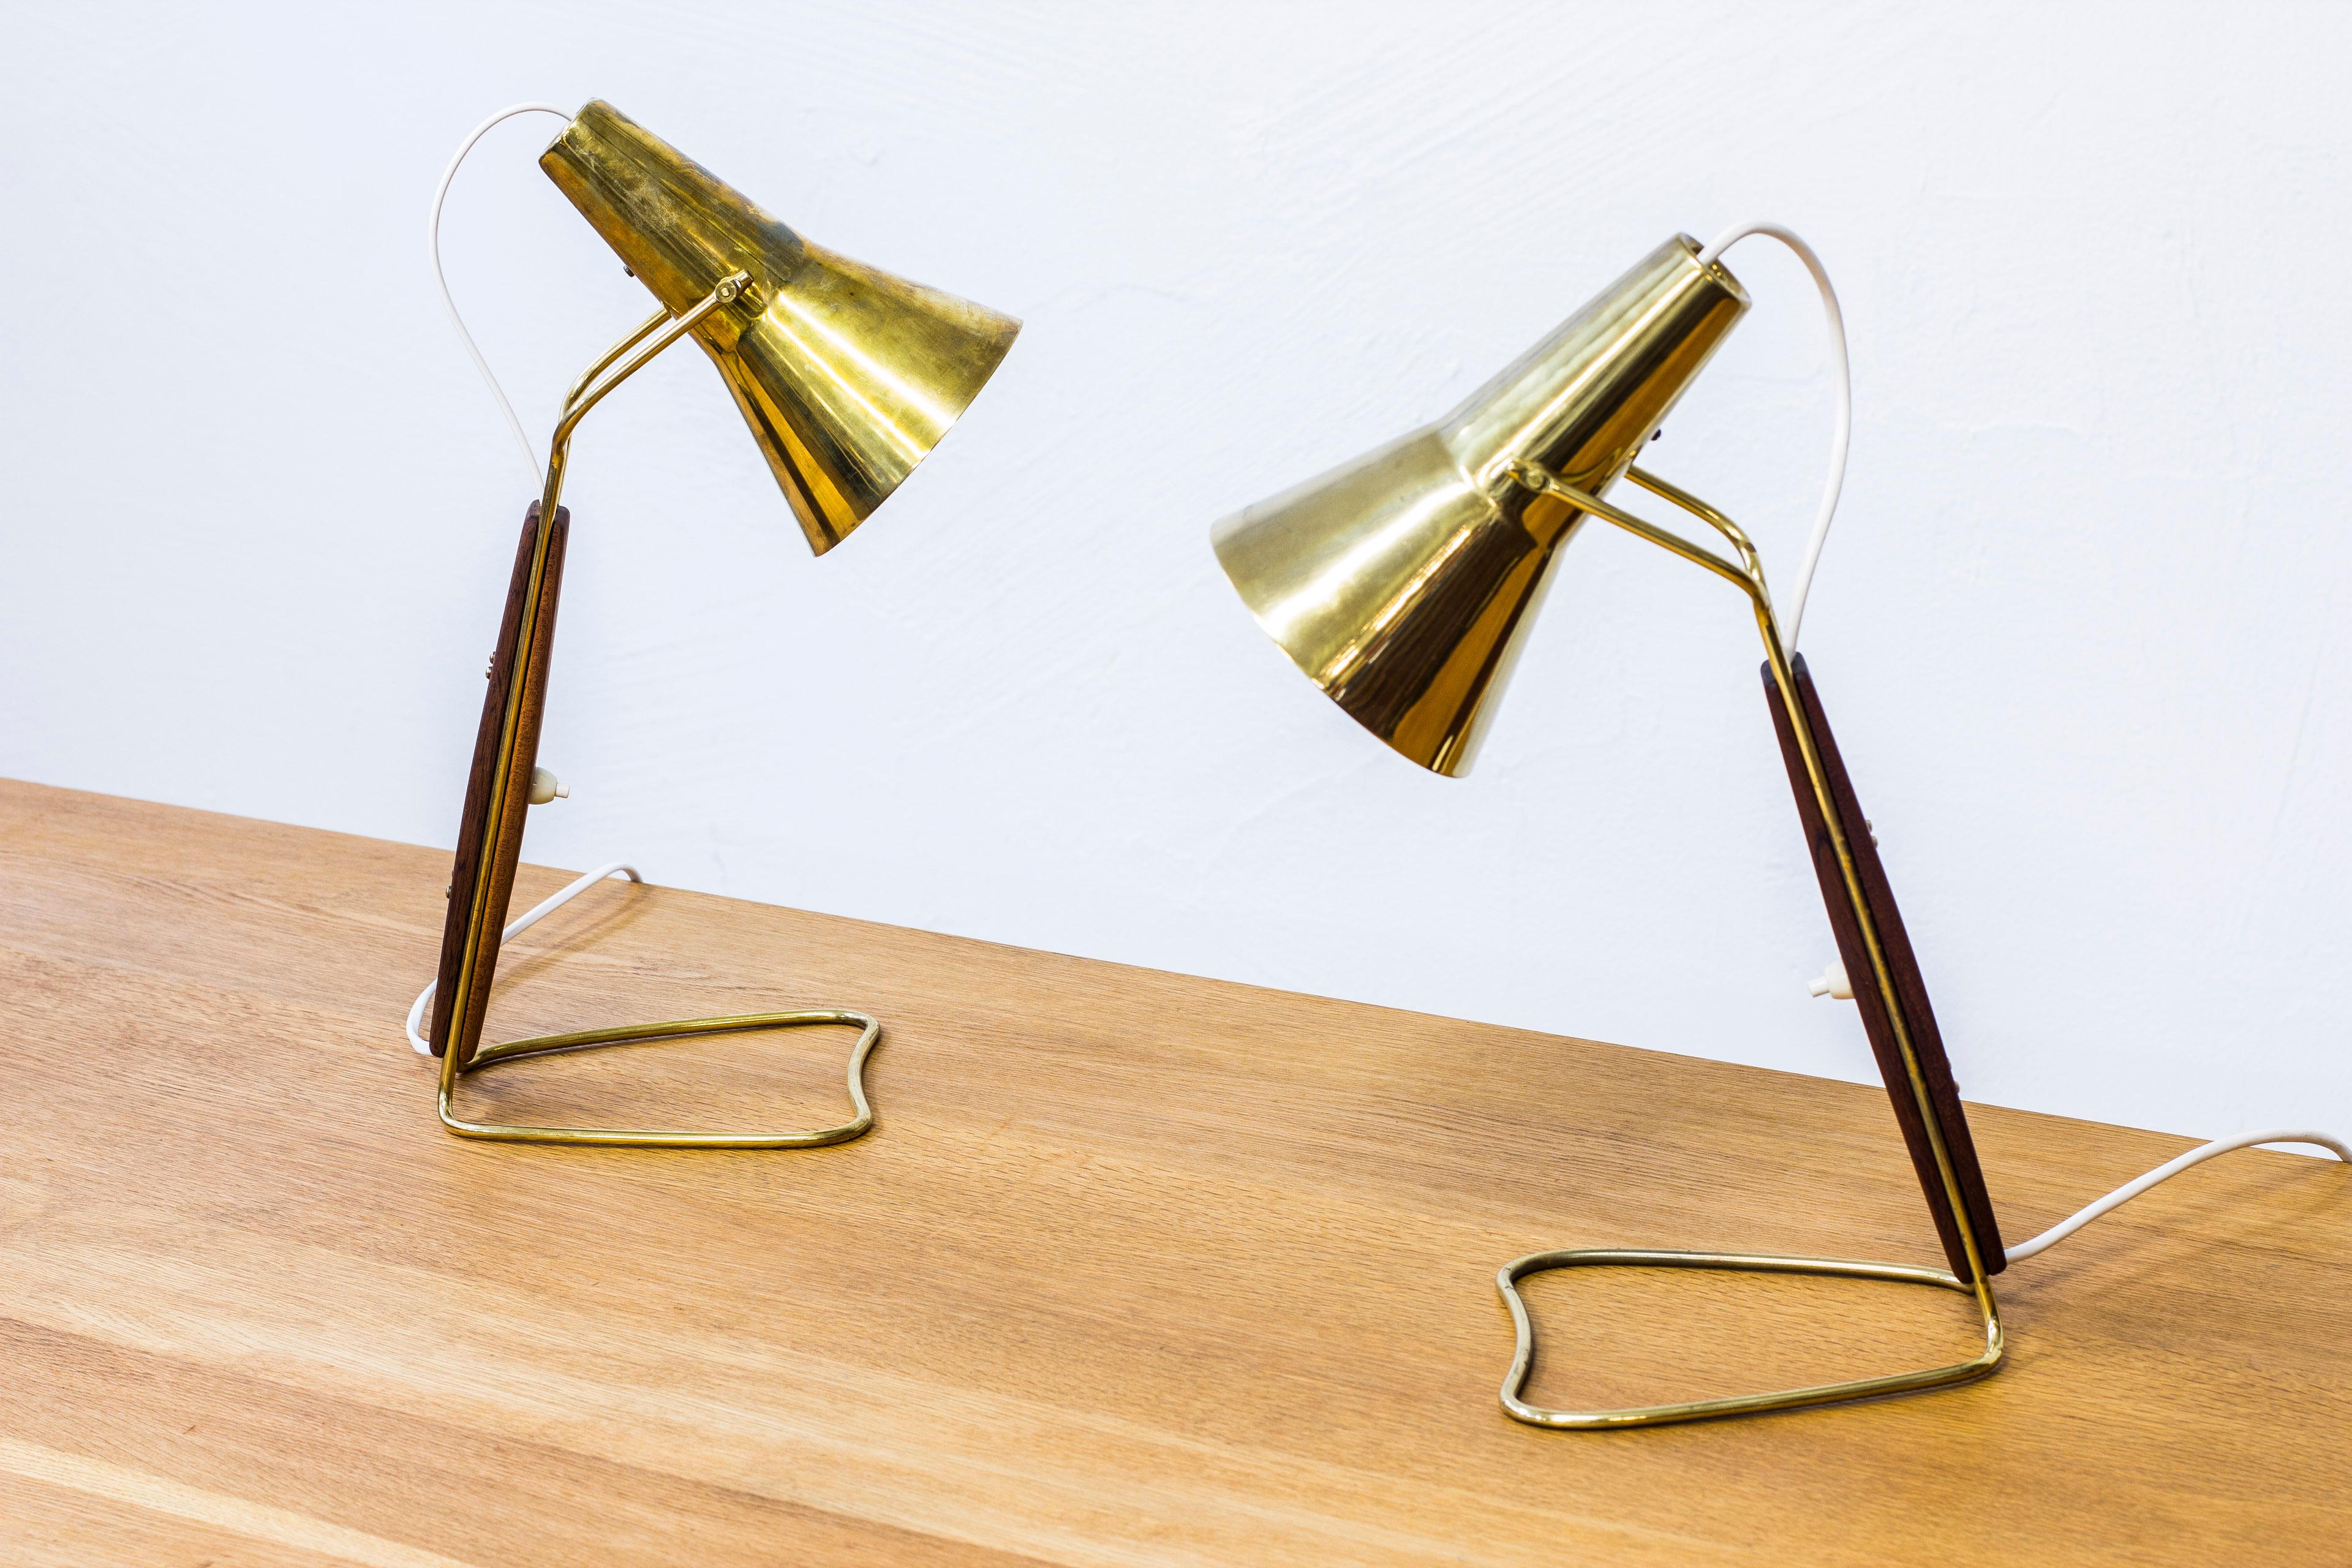 Pair of rare table lamps produced by ASEA in Sweden. Attributed to Hans Bergström. Made from polished brass and solid mahogany. Light switch on the lamps in working condition. New electric cables. Very good condition with few signs of wear and light